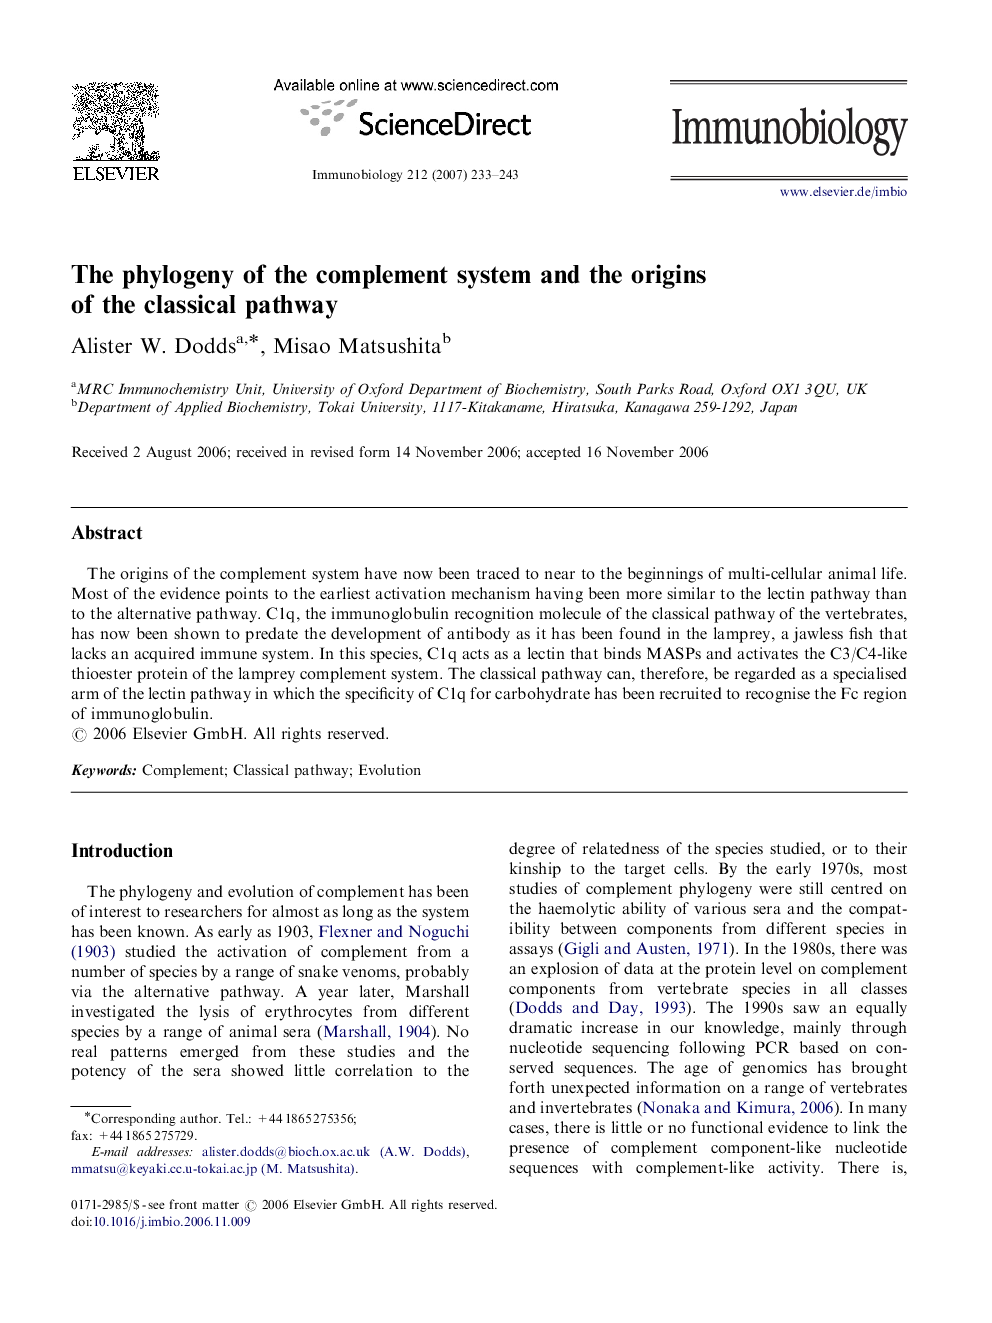 The phylogeny of the complement system and the origins of the classical pathway